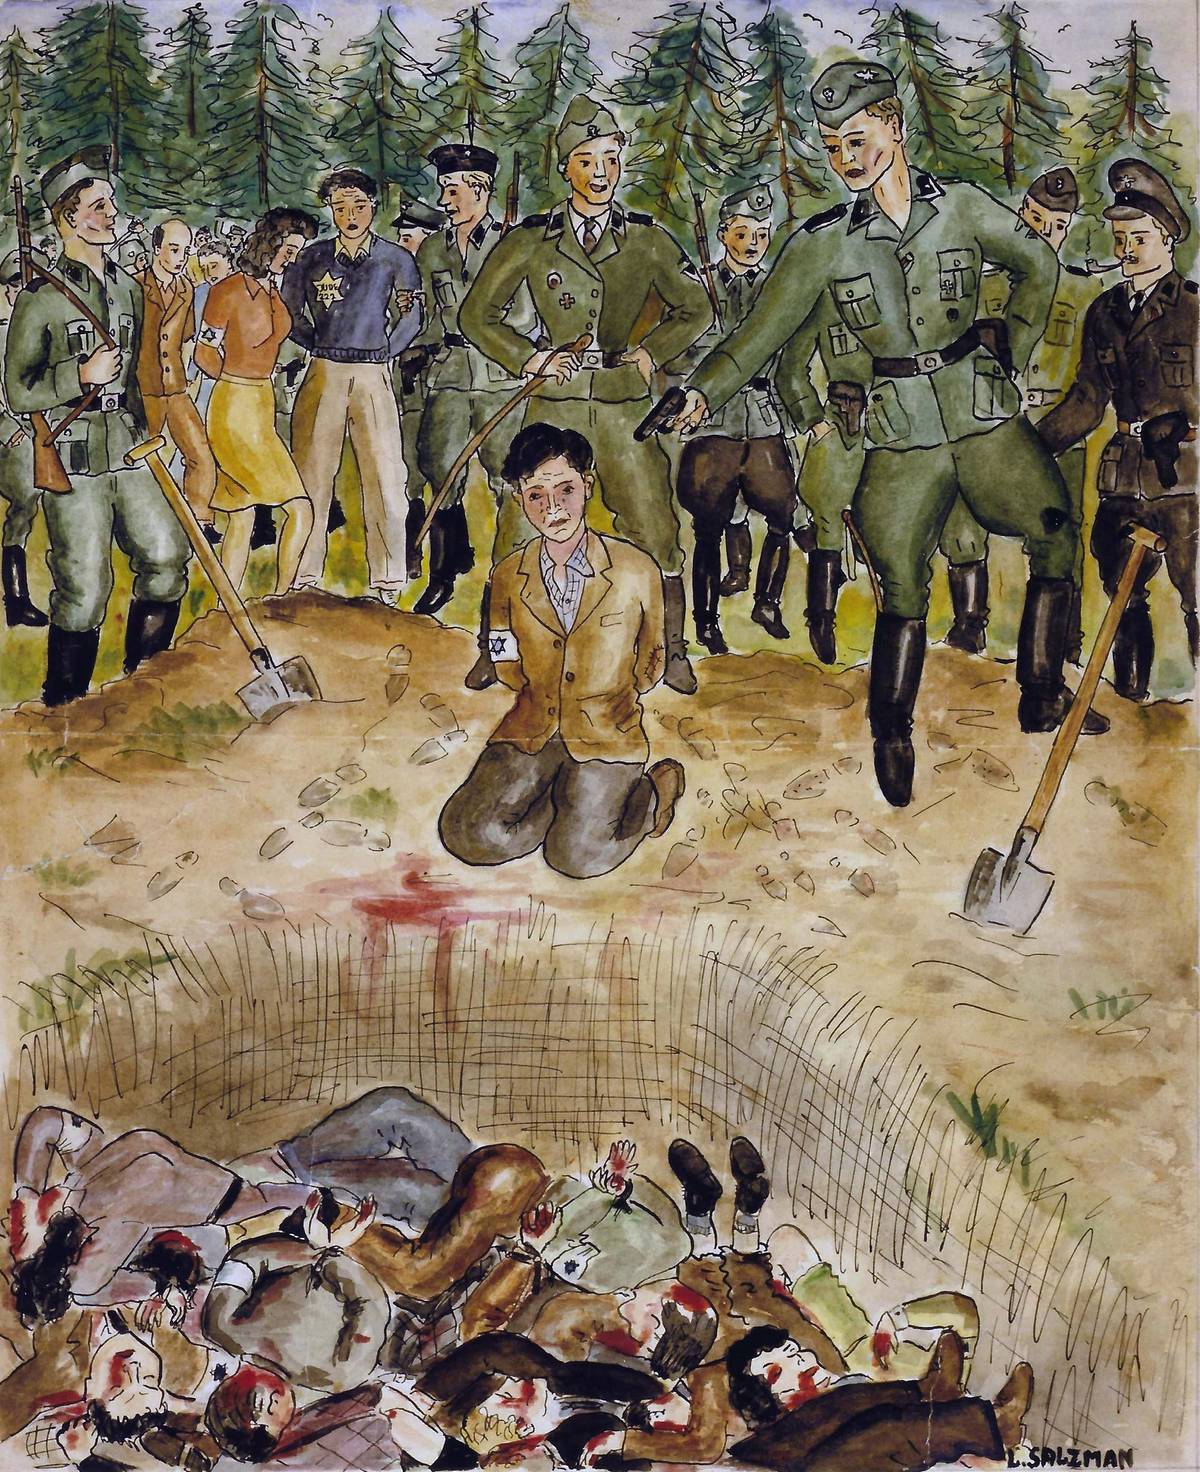 'Execution Pit' painted by George Salton (then Lucjan Salzman) in 1946 at a displaced persons camp